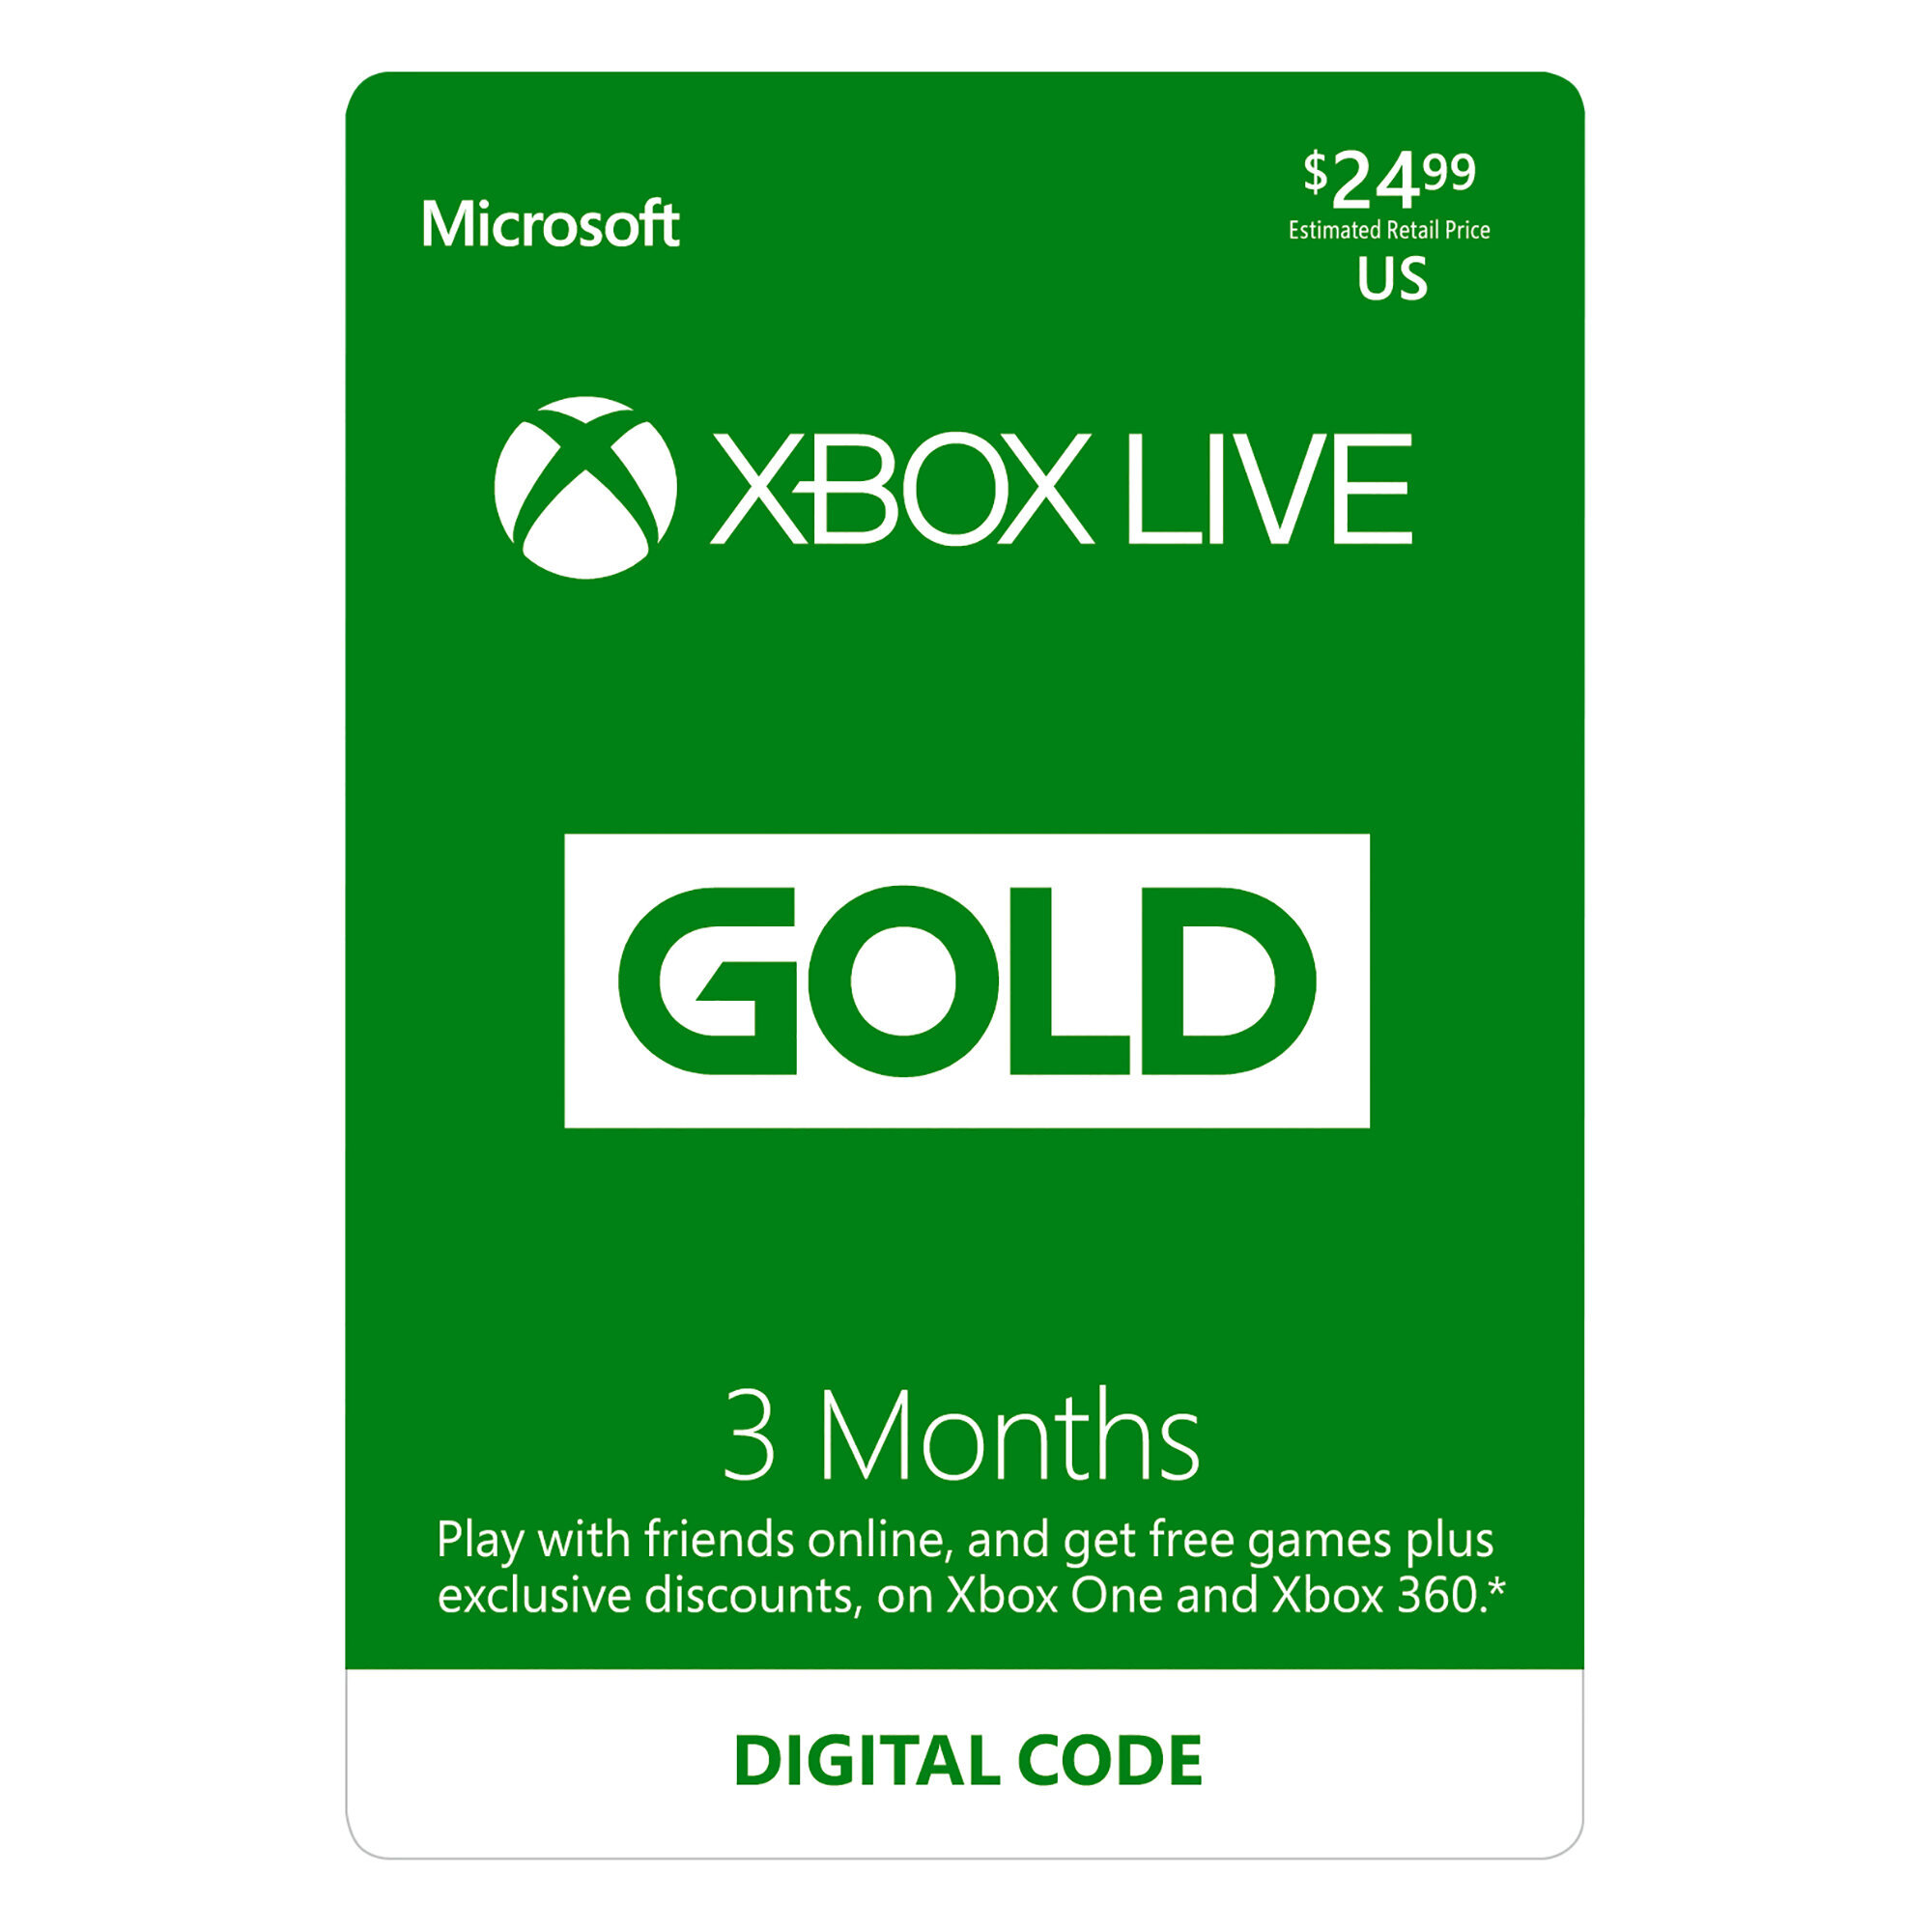 xbox gold ultimate year price